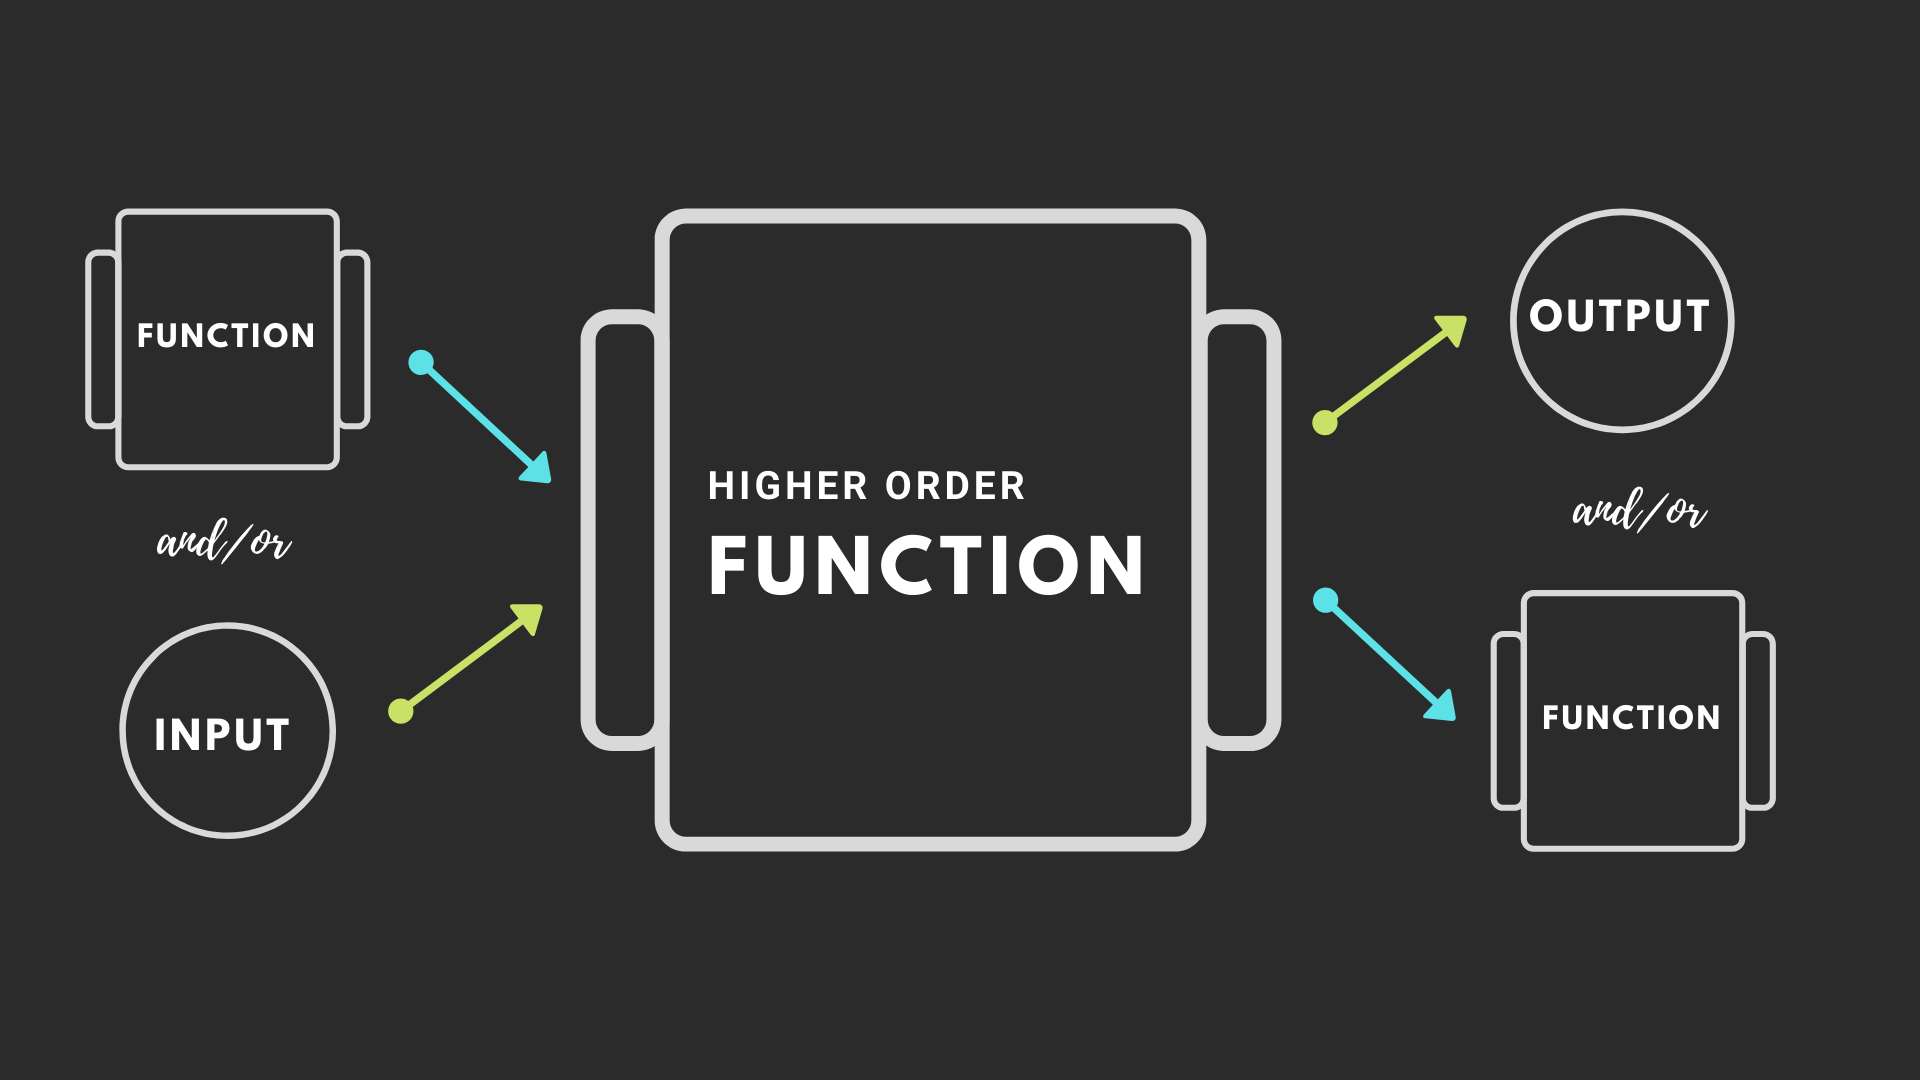 Higher oder functions explained visually, showing you can have a function as an input, or an output